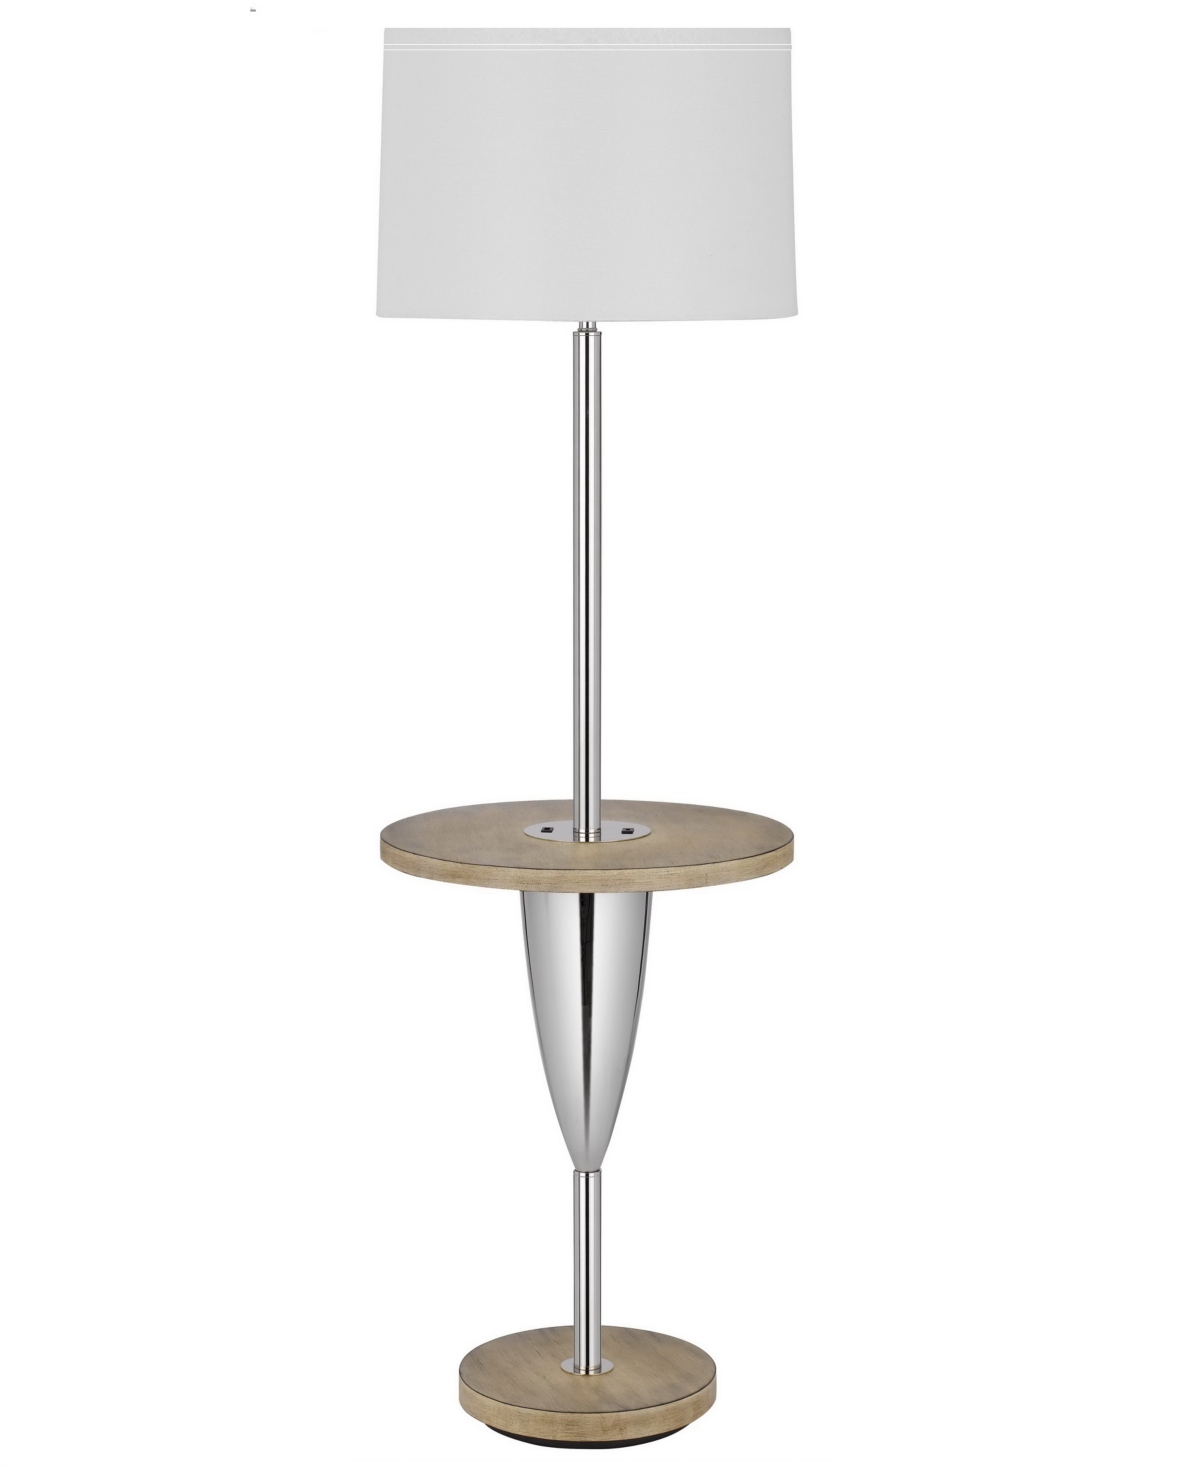 Cal Lighting 61" Height Metal Floor Lamp With Wooden Tray Table In Chrome,wood